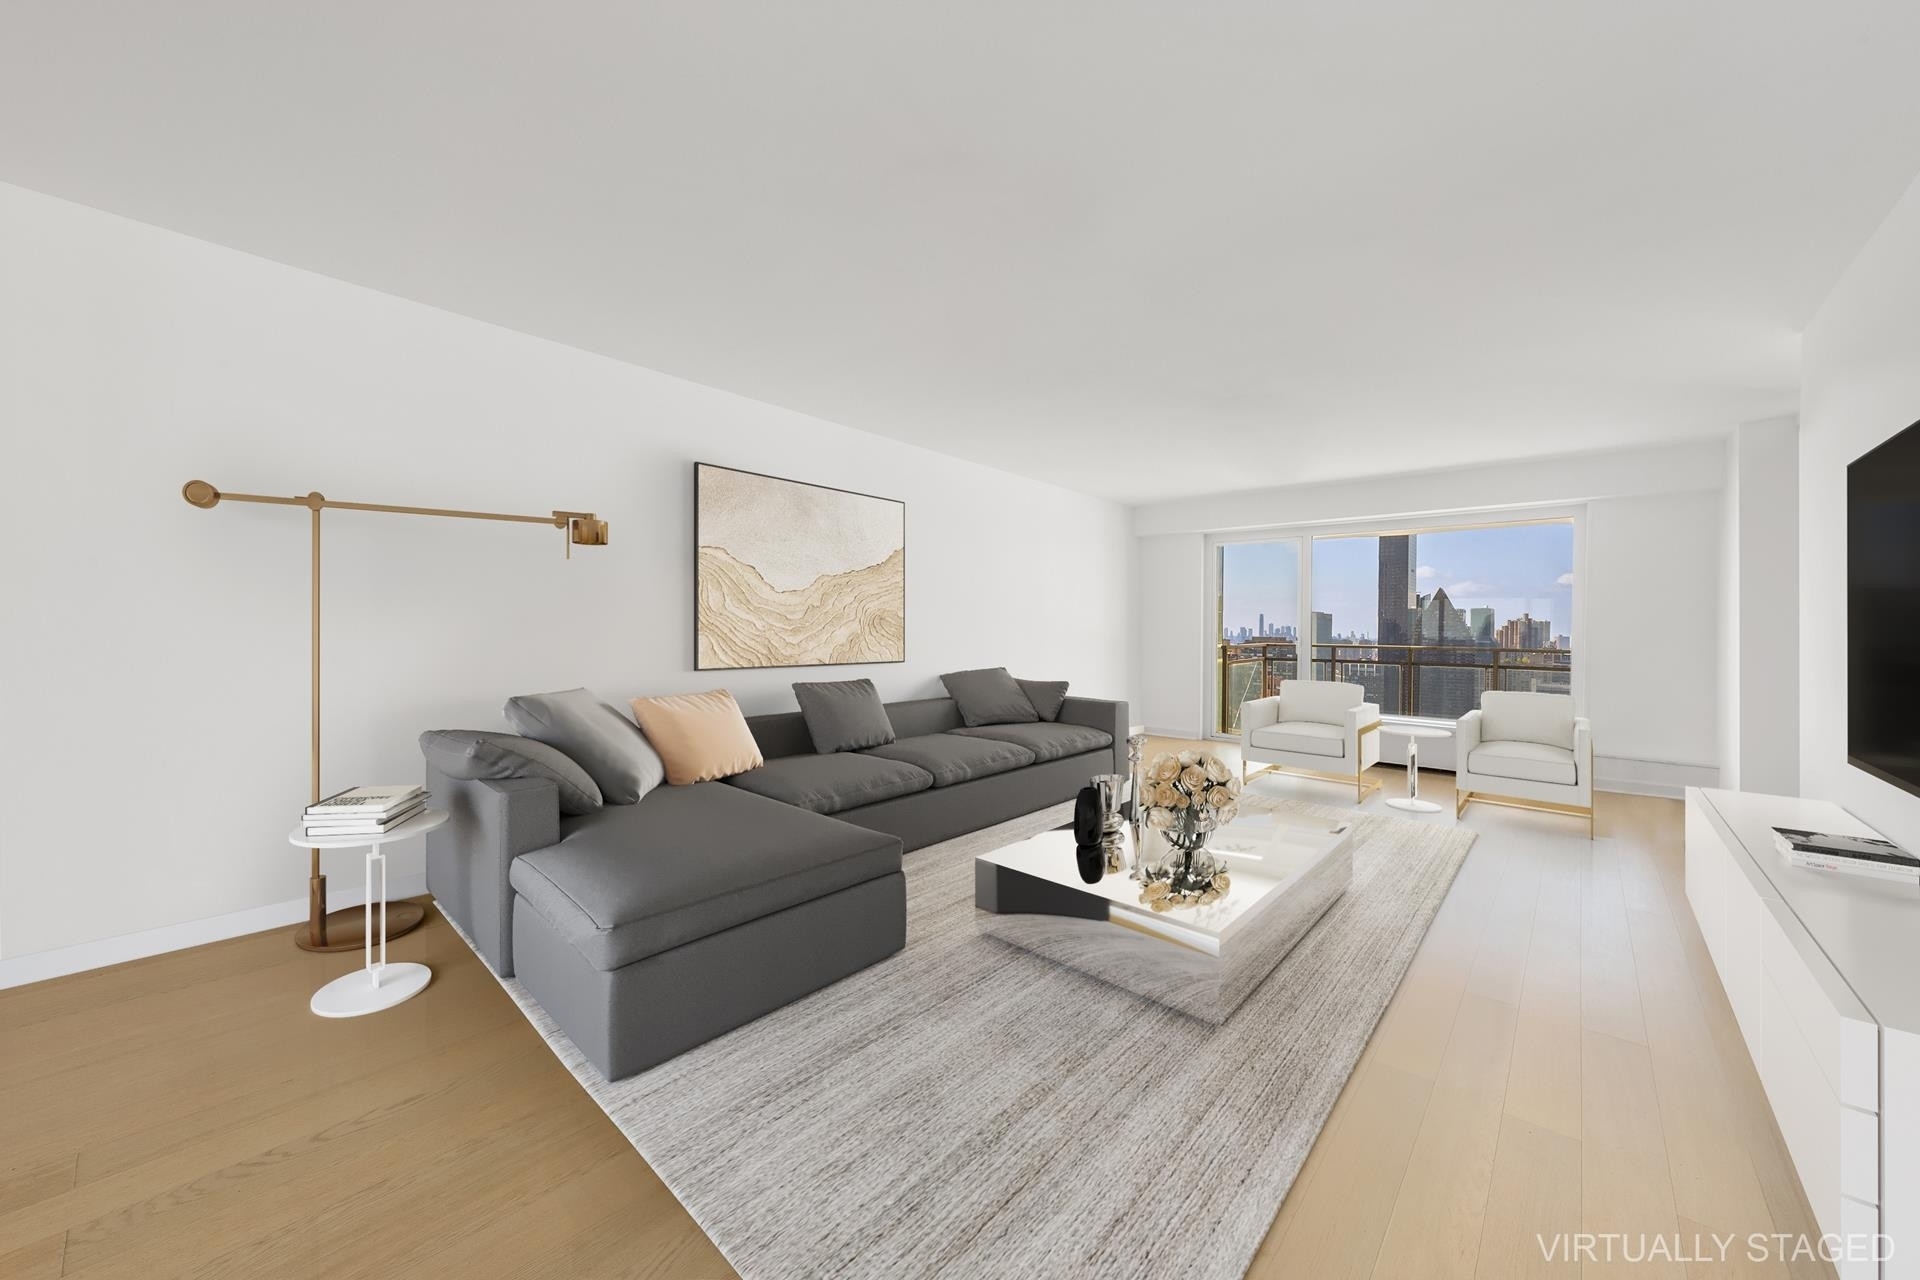 Co-op Properties for Sale at The Excelsior, 303 E 57TH ST, 41G Midtown East, New York, NY 10022